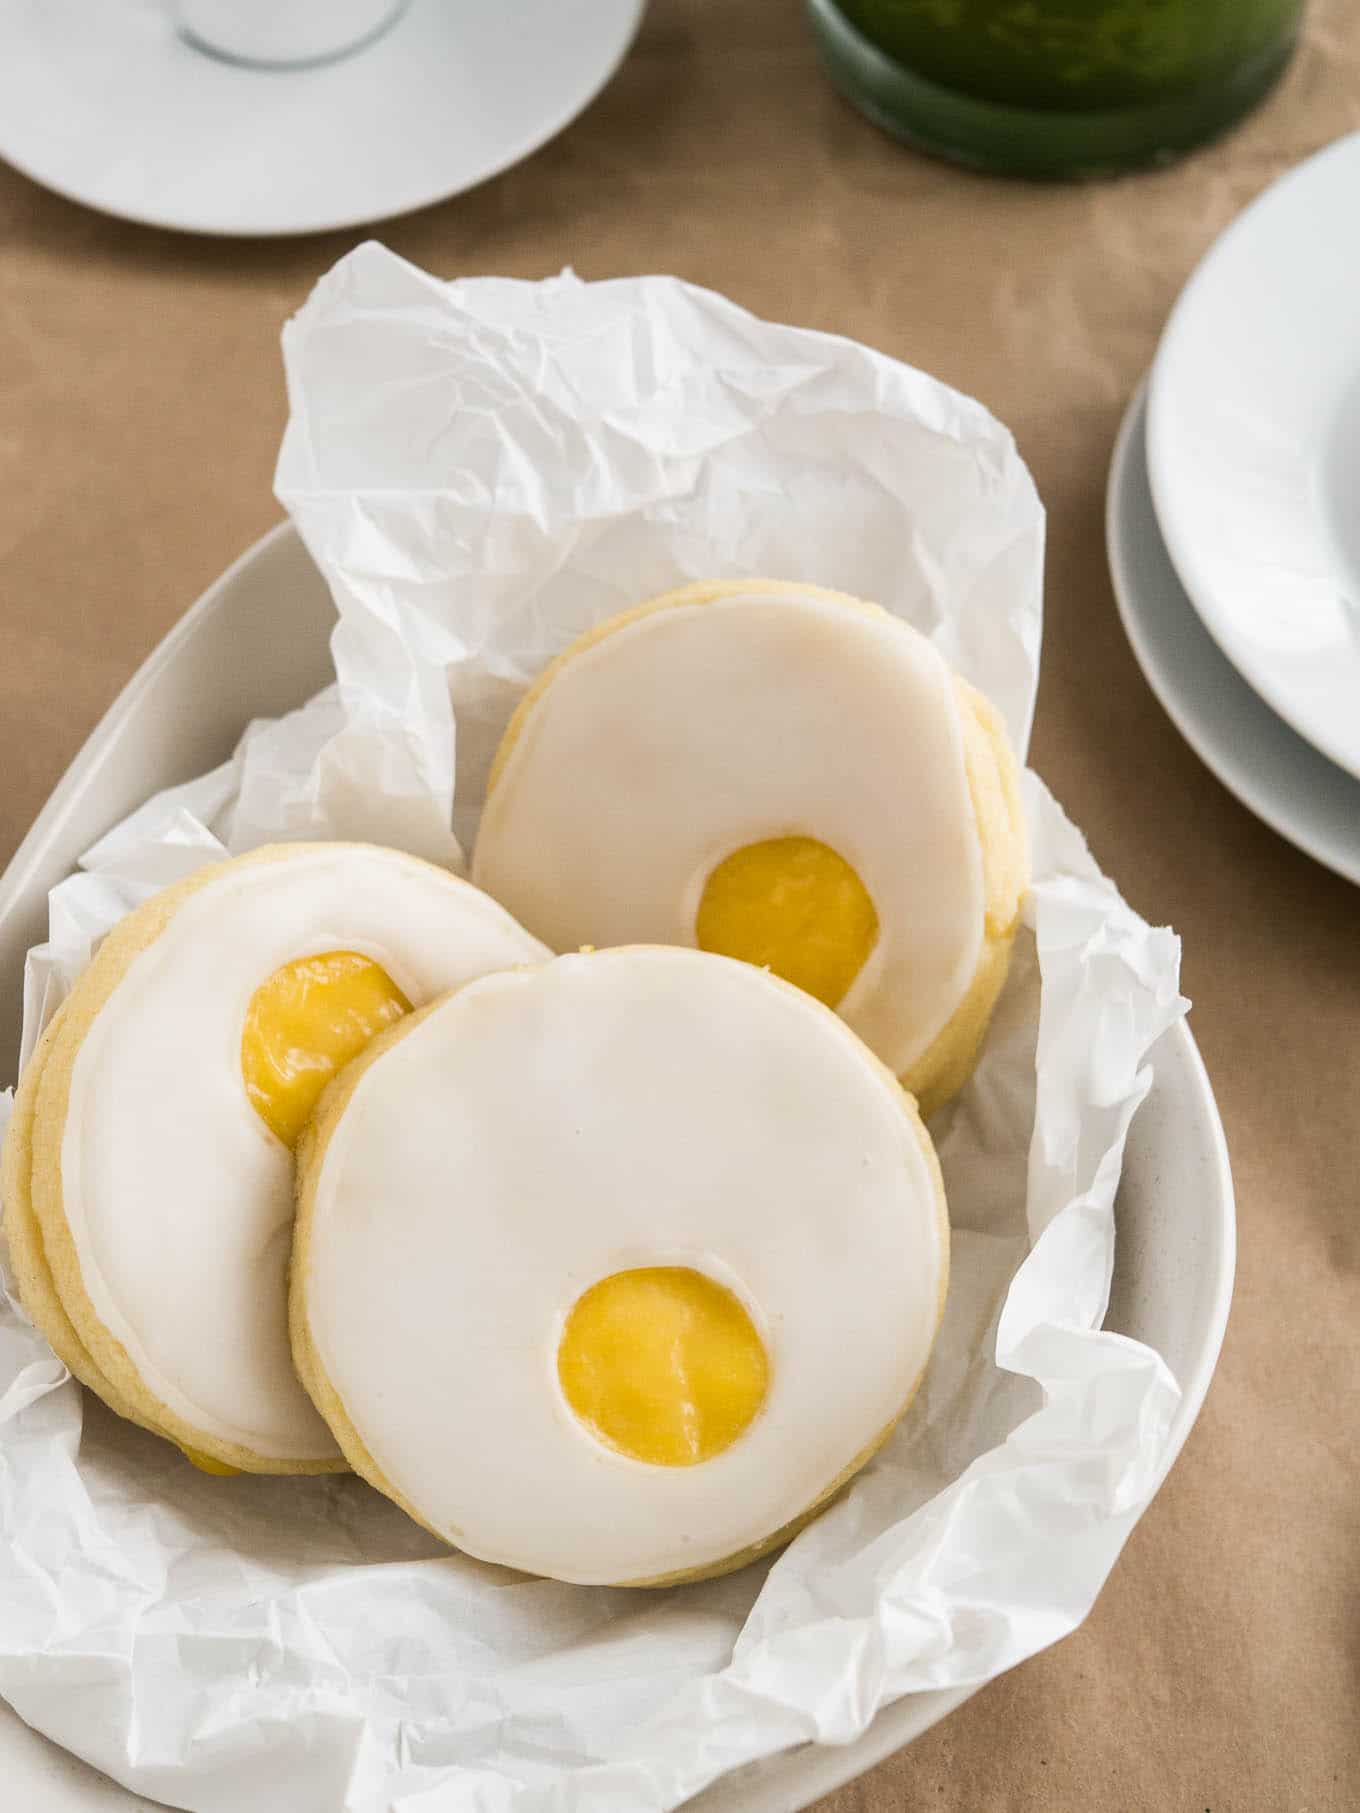 A bowl, lined with parchment paper, with 3 easter sugar cookies with lemon curd (resembling a sunny side up egg) on brown parchment paper next to a stack of plates.